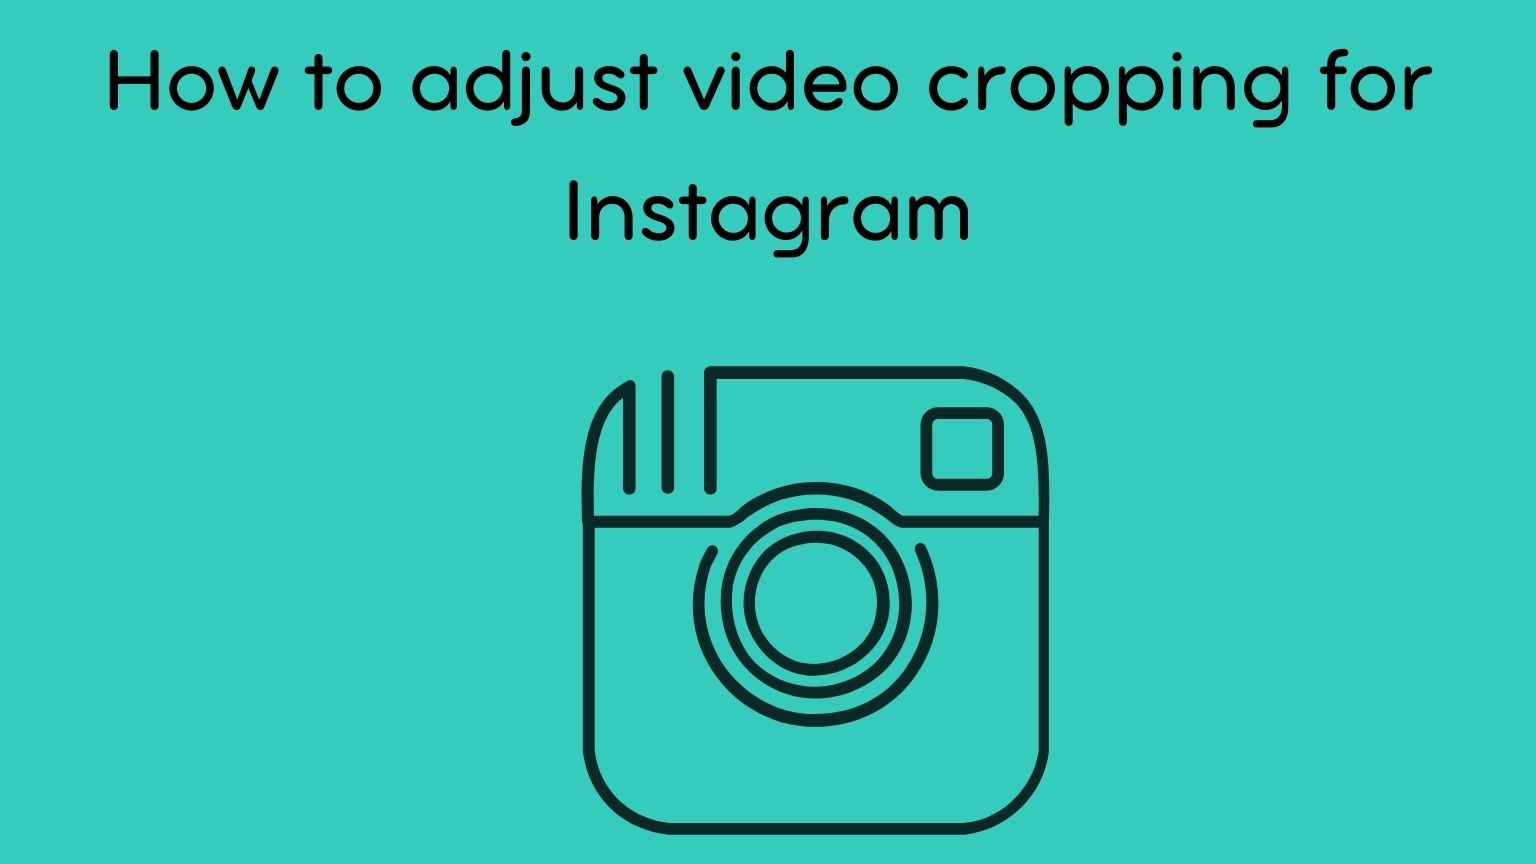 How to Adjust Video Cropping for Instagram - Rav.ai